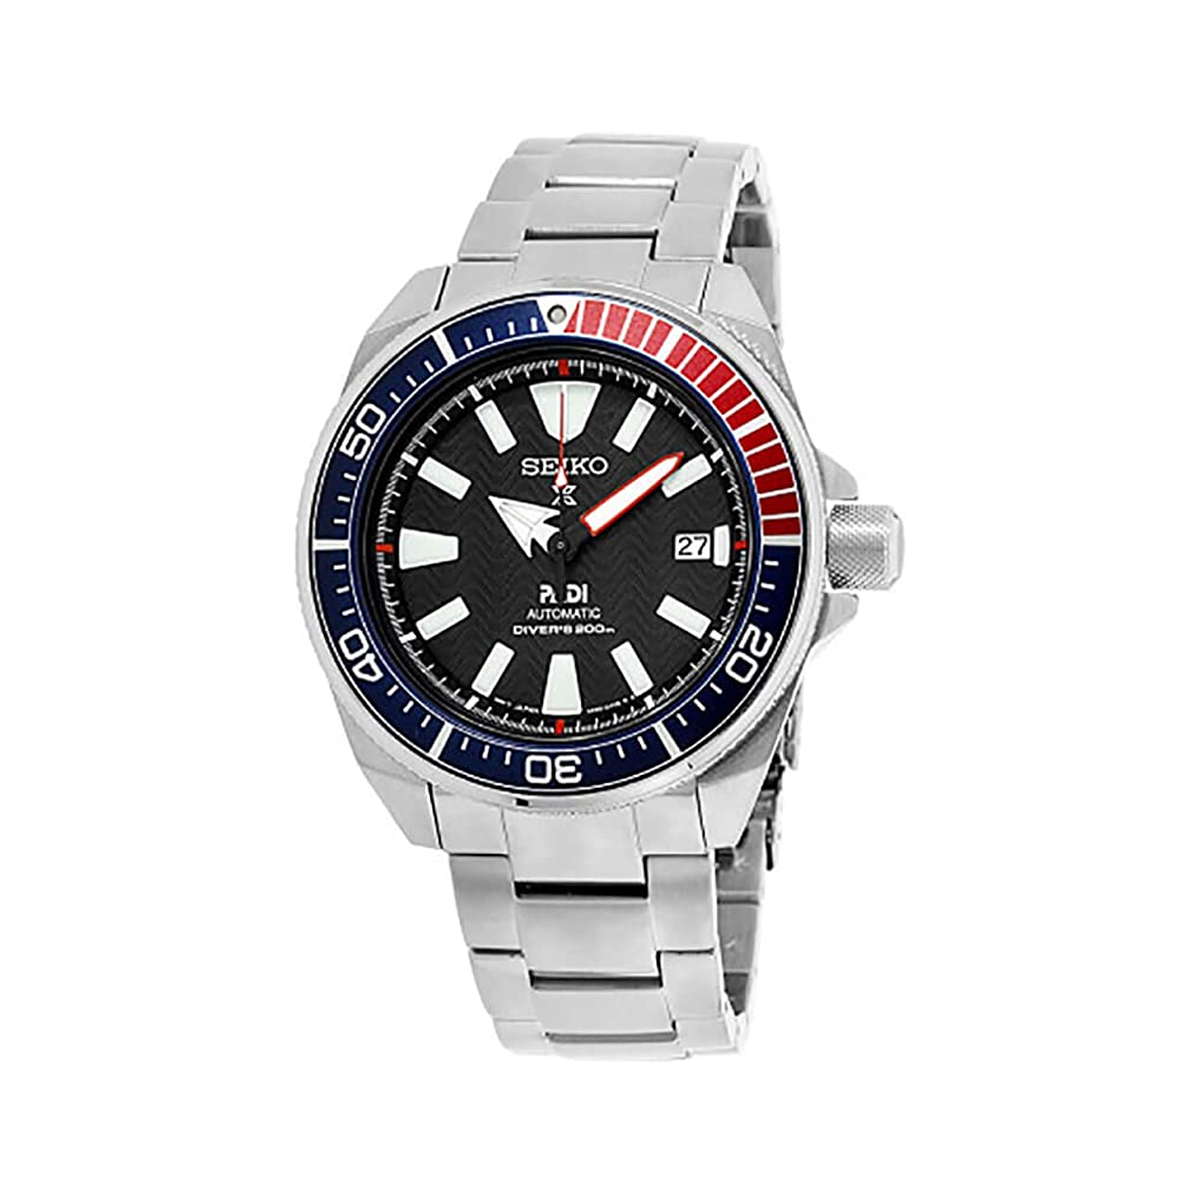 Stainless Steel Seiko Prospex Padi Special Edition Watch